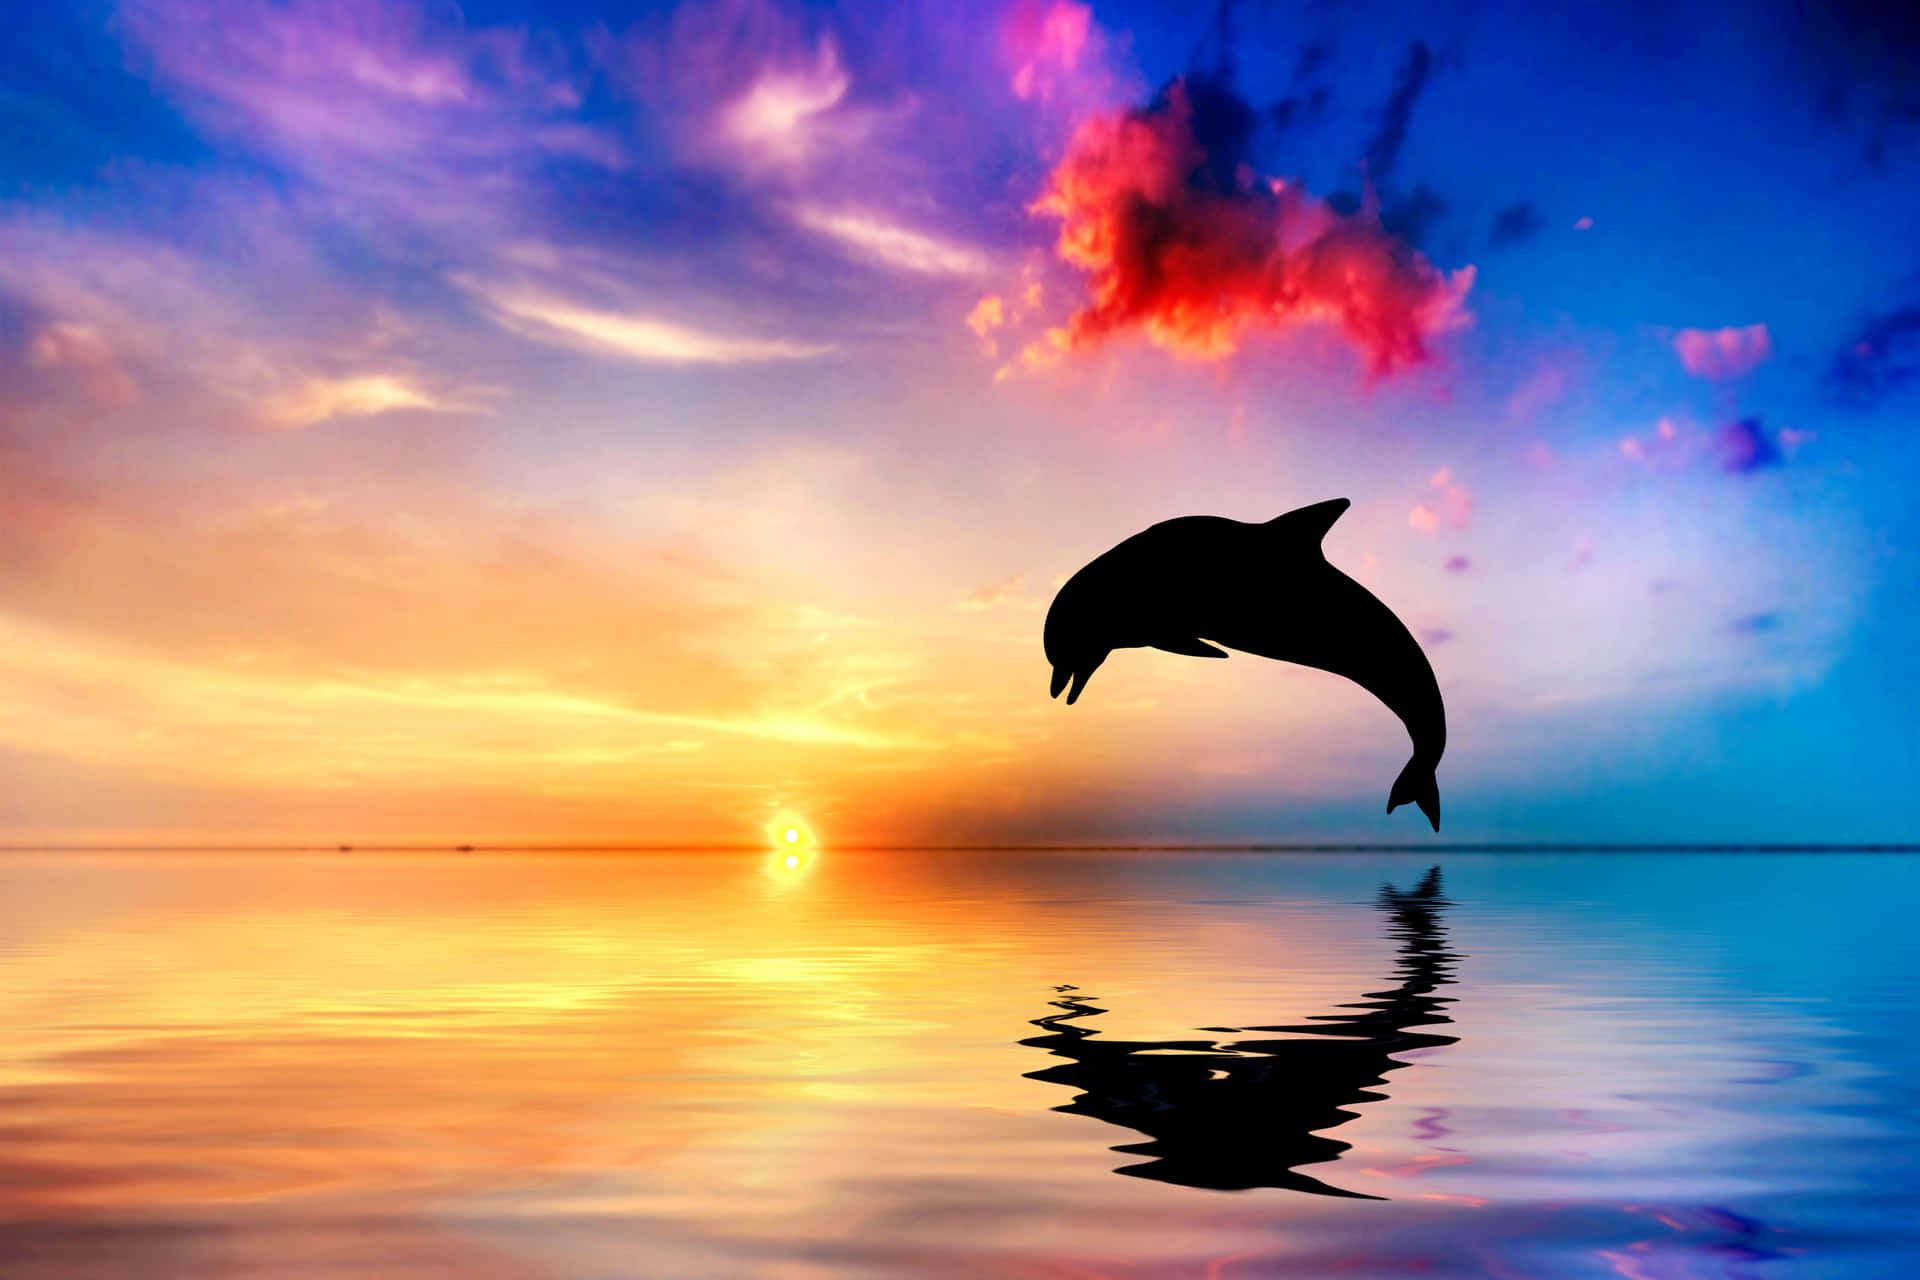 Relax by the Water with this Cool Dolphin Wallpaper